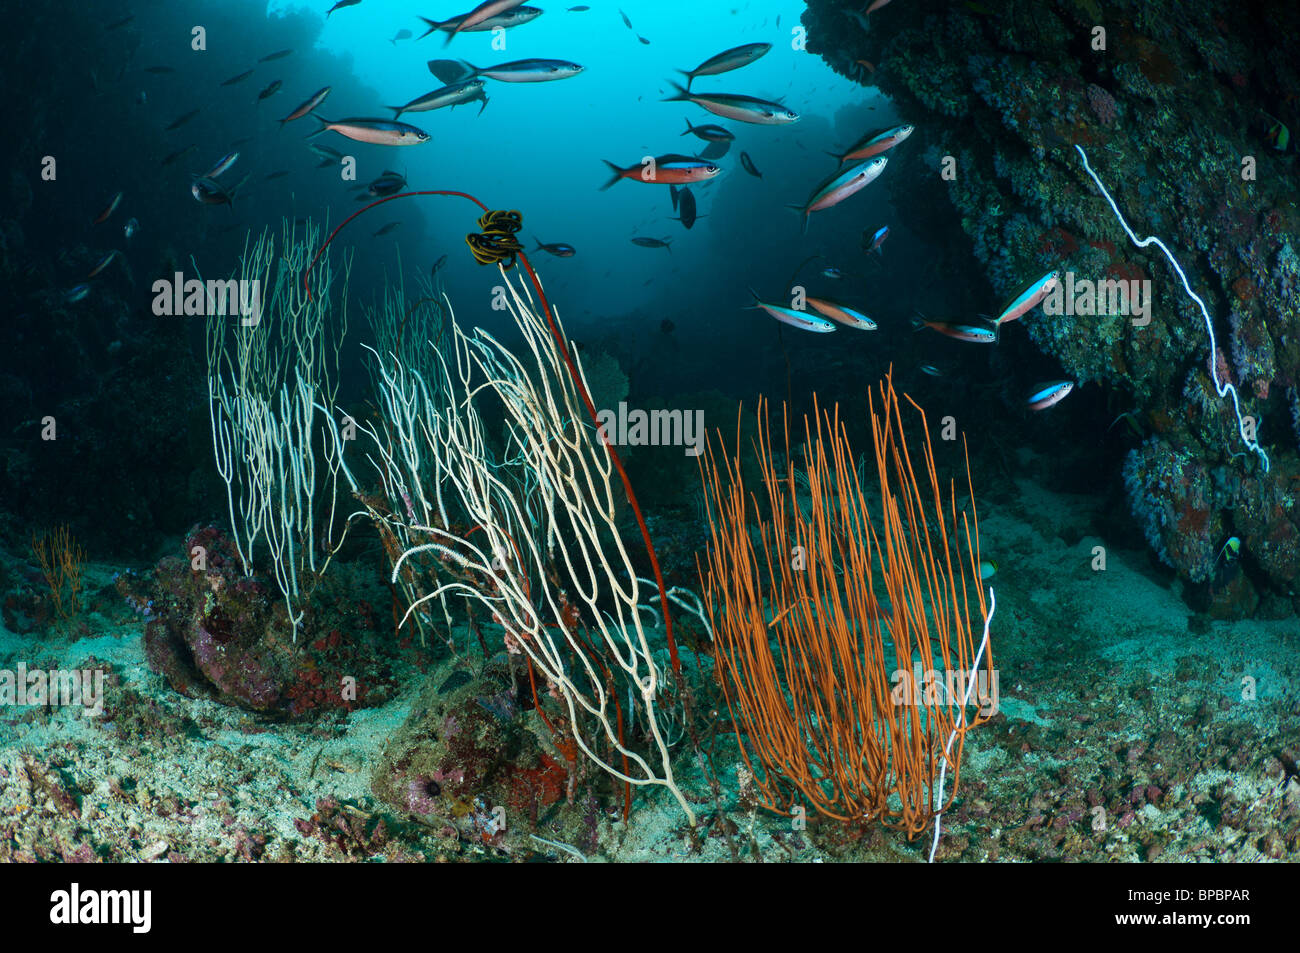 Sea whips, fans and fusiliers, Pulau Weh, Sumatra, Indonesia. Stock Photo